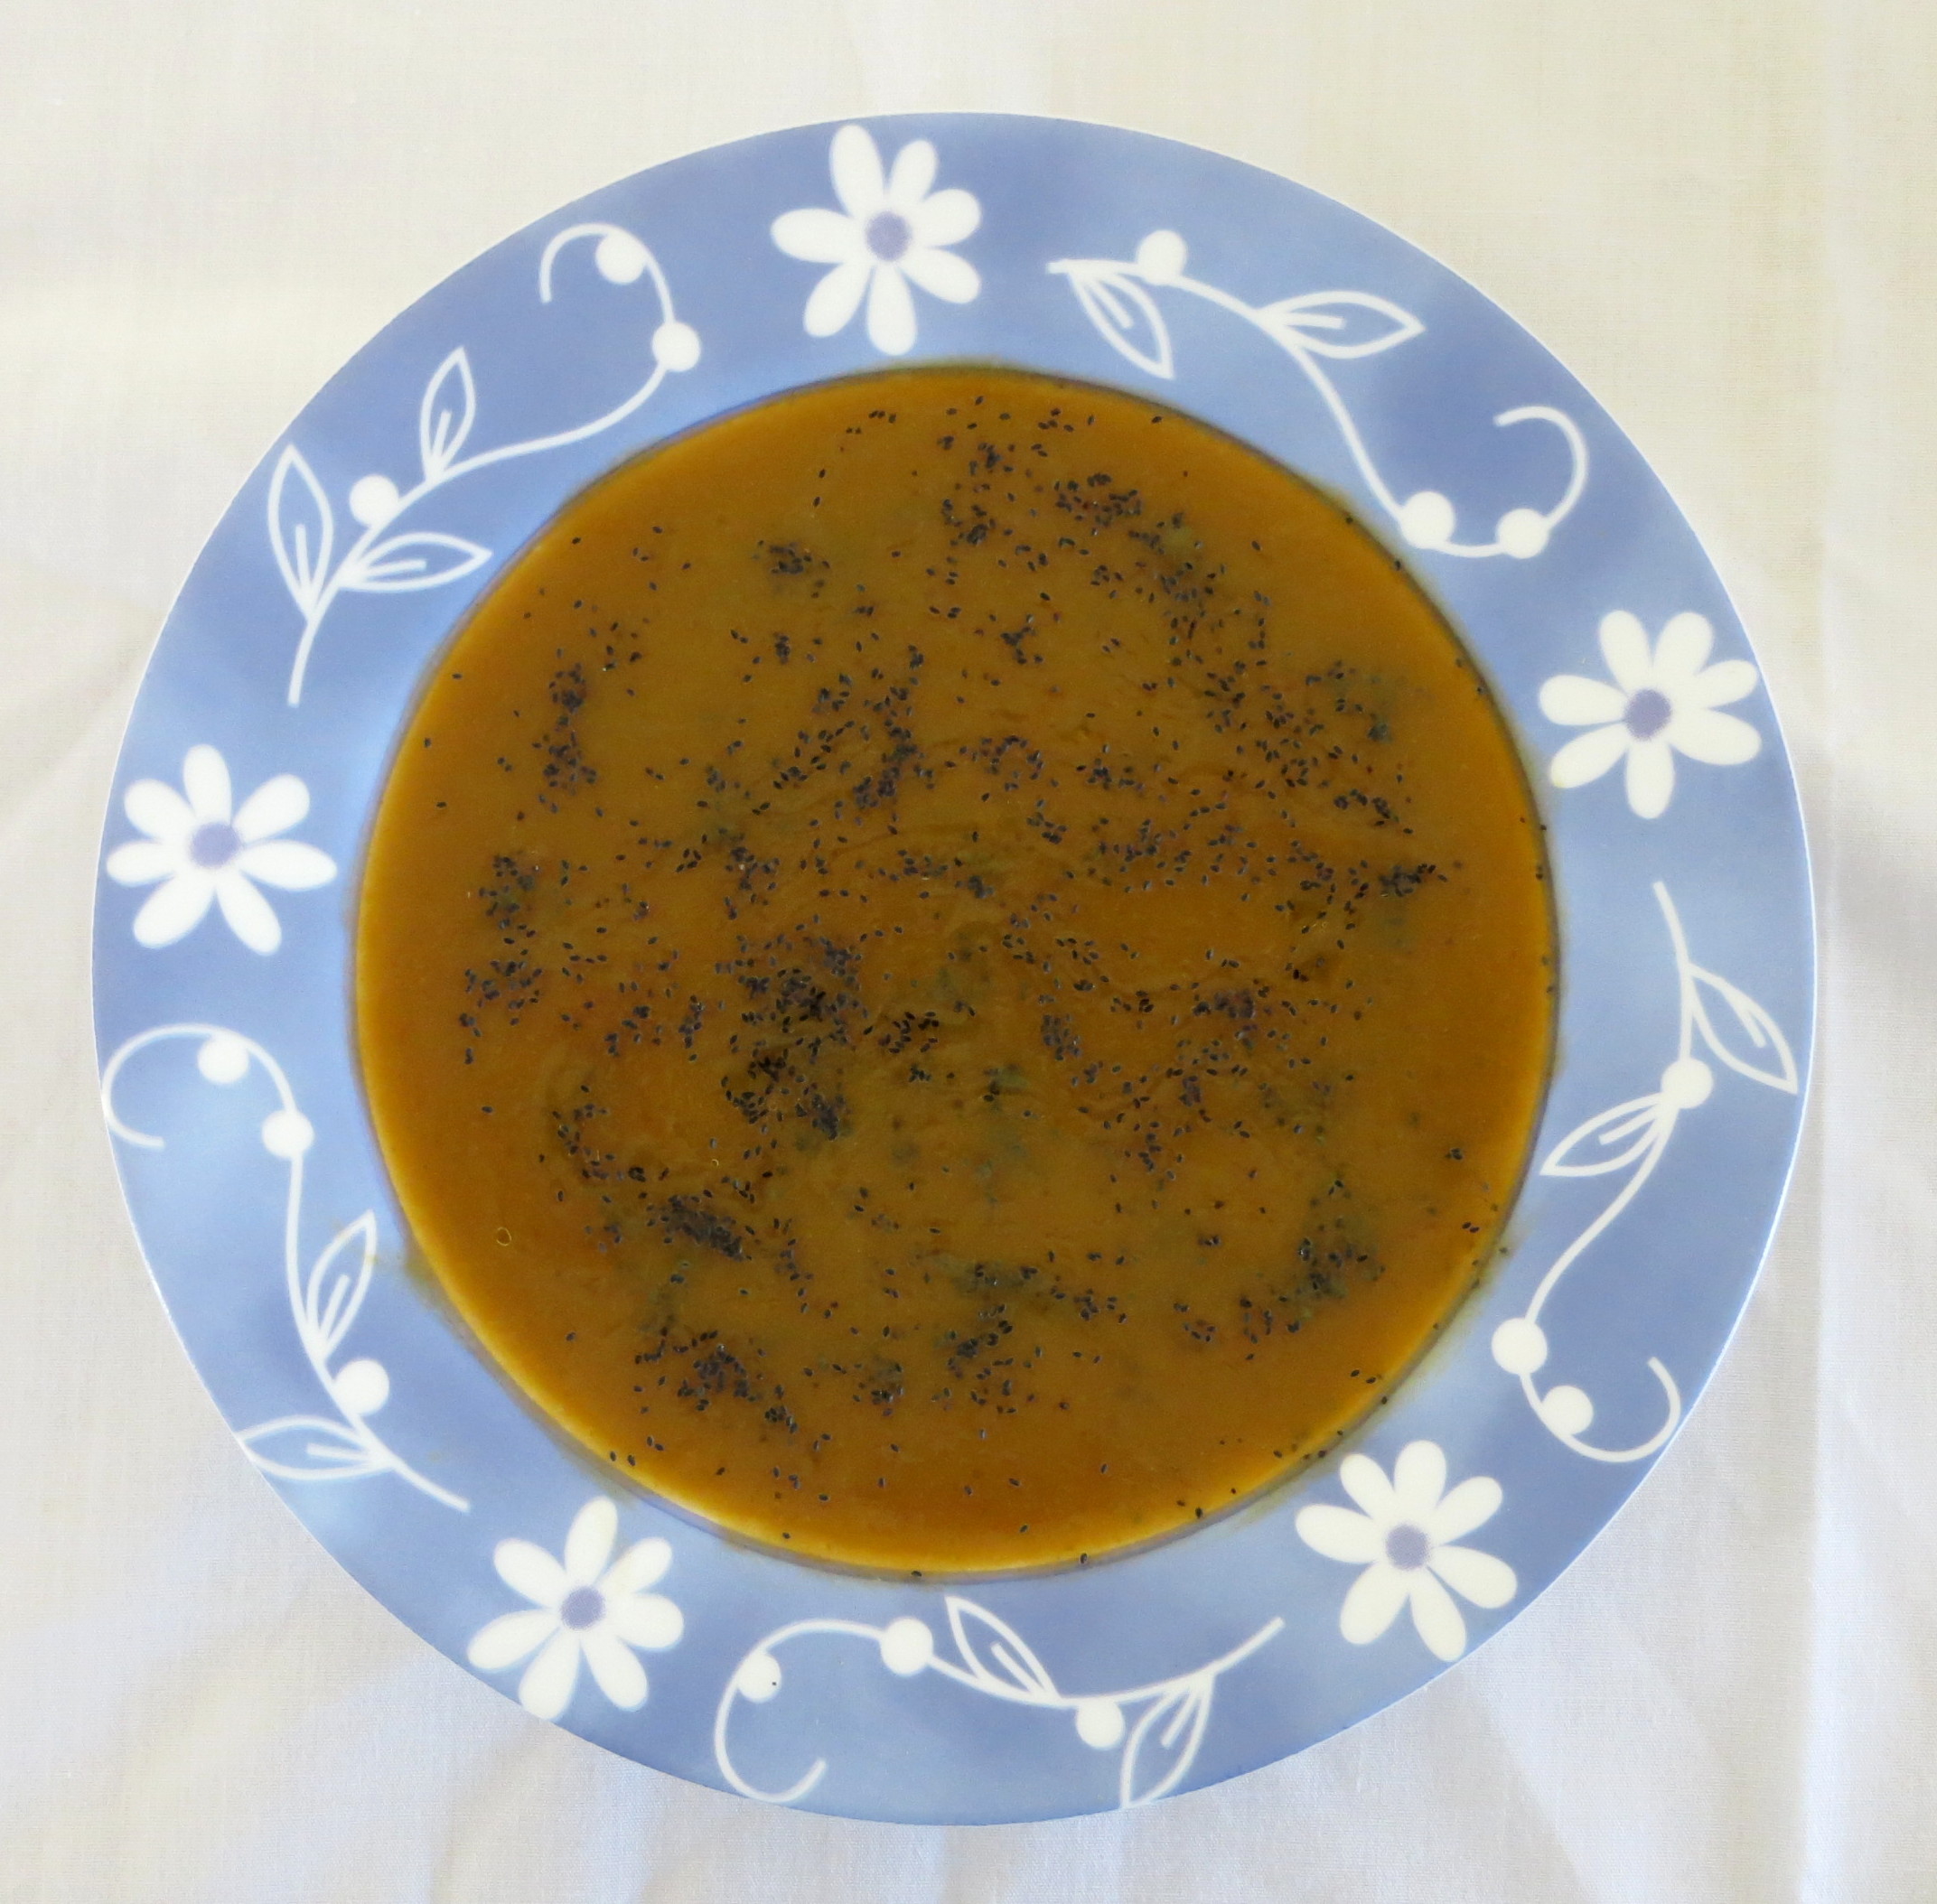 Plate with millet and tukmaria soup